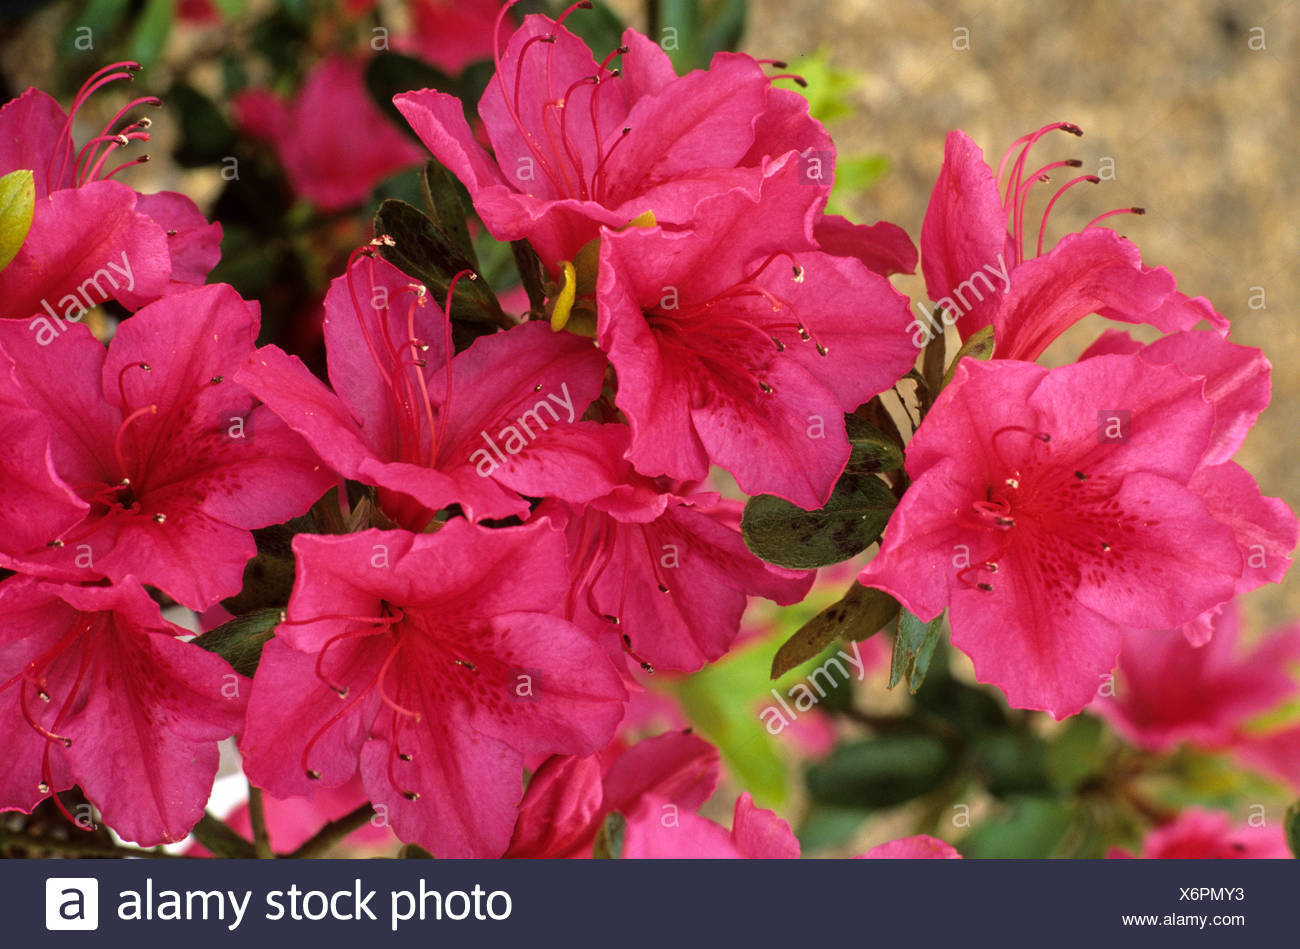 My Favorite Plant In The Garden This Week Is Rhododendron Hino